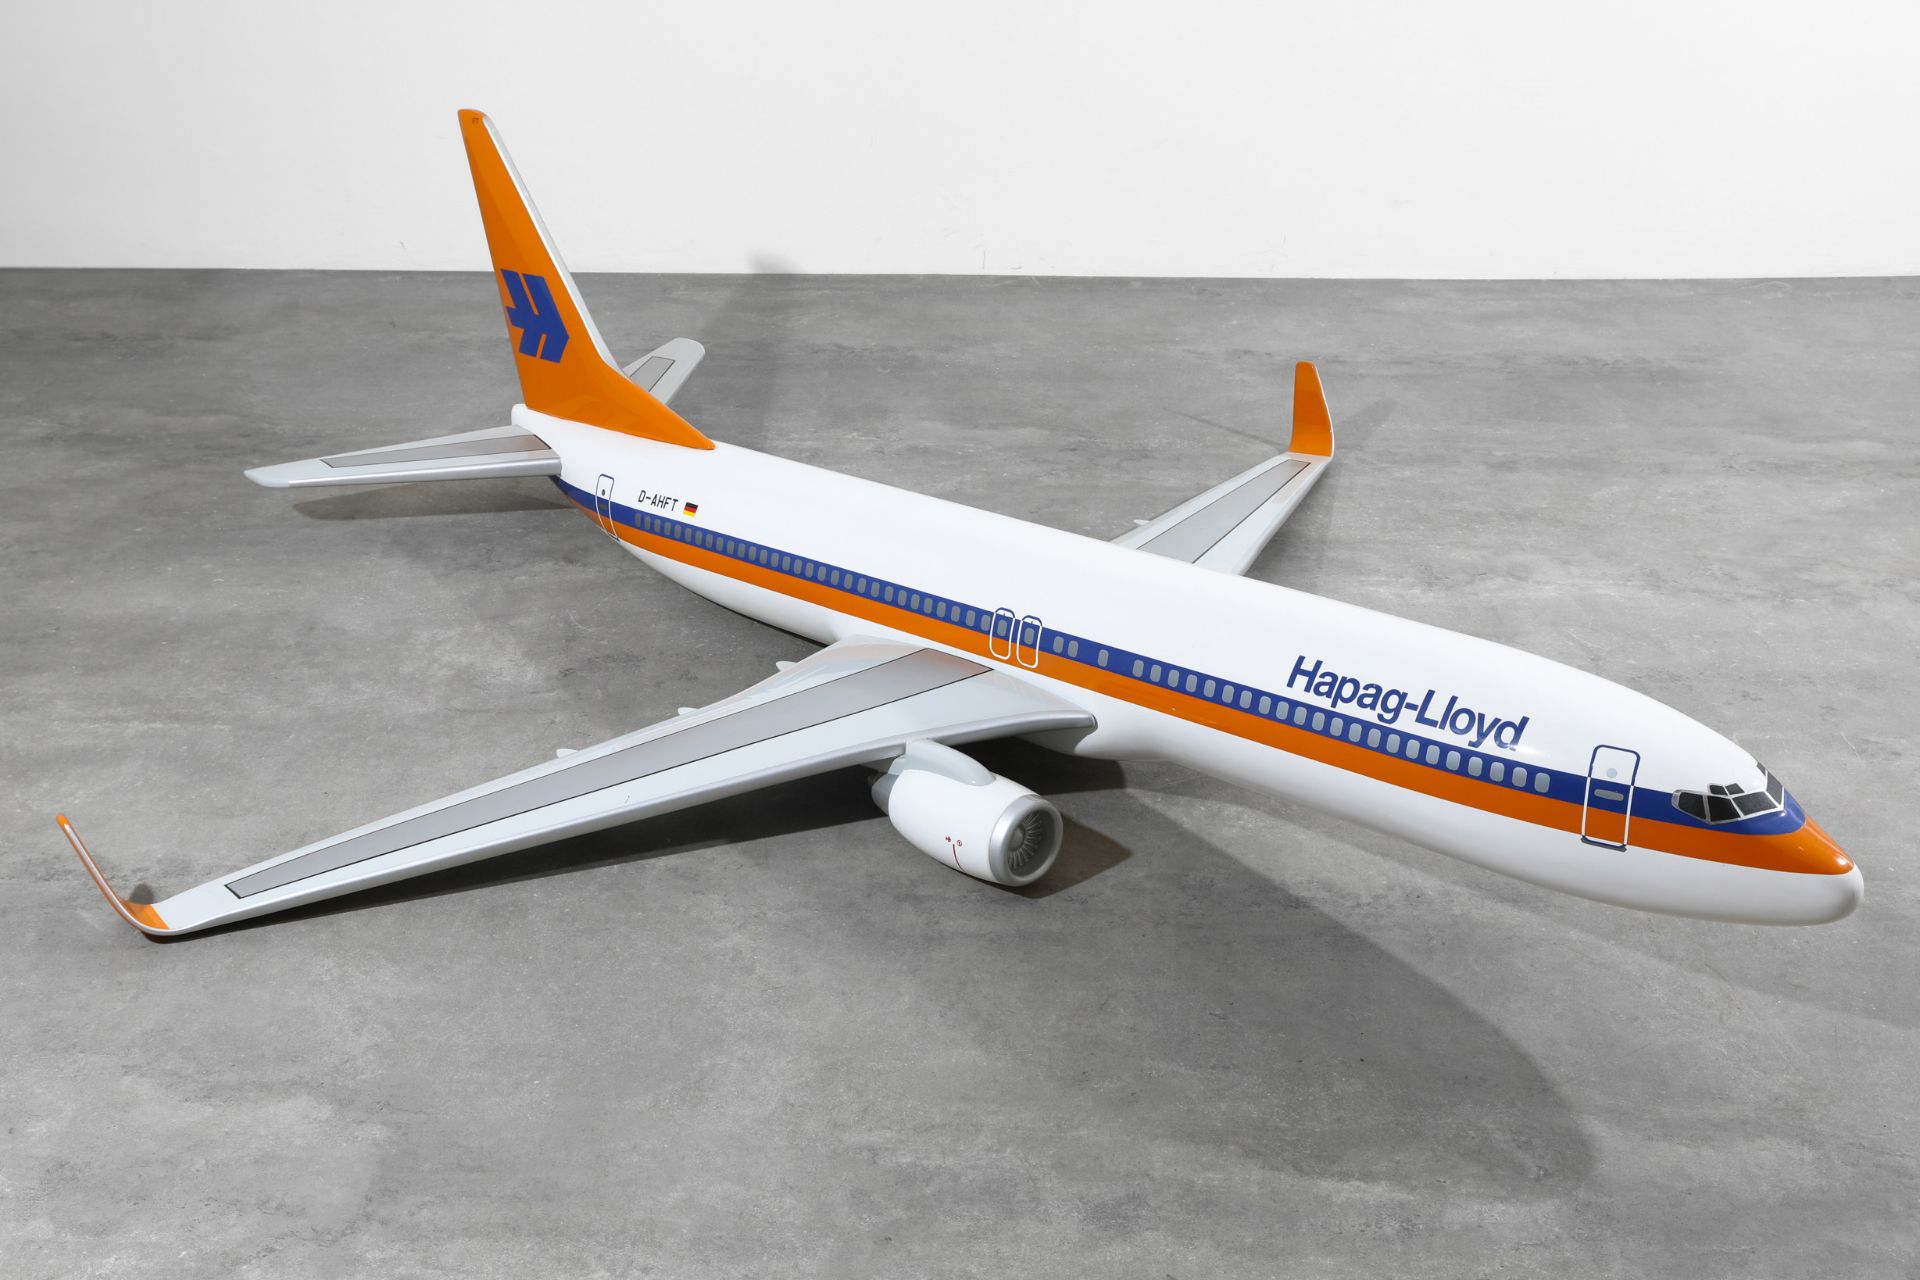 Hapag Lloyd, Boeing 737, large aircraft model, scale 1:12